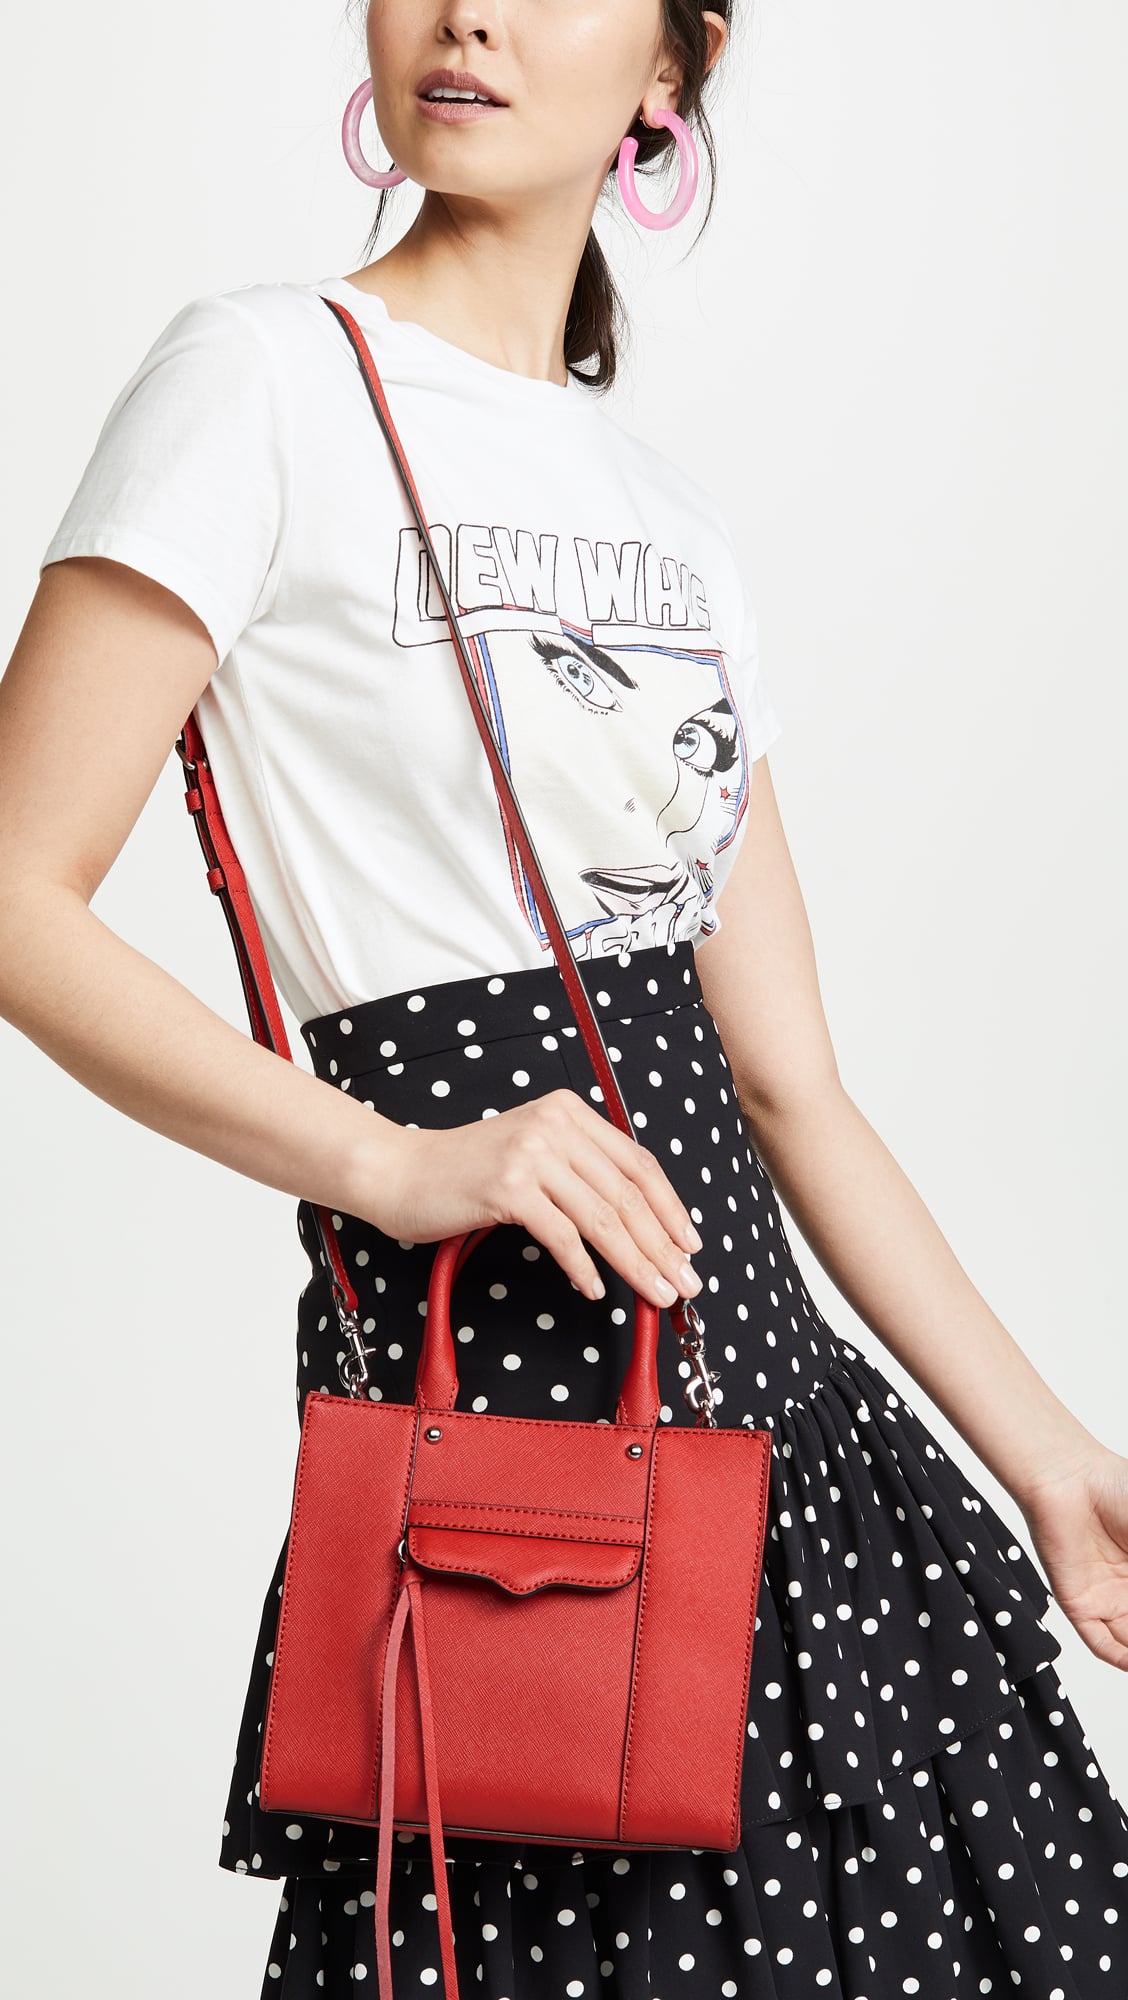 Trying Trends  The Belt Bag - Venti Fashion